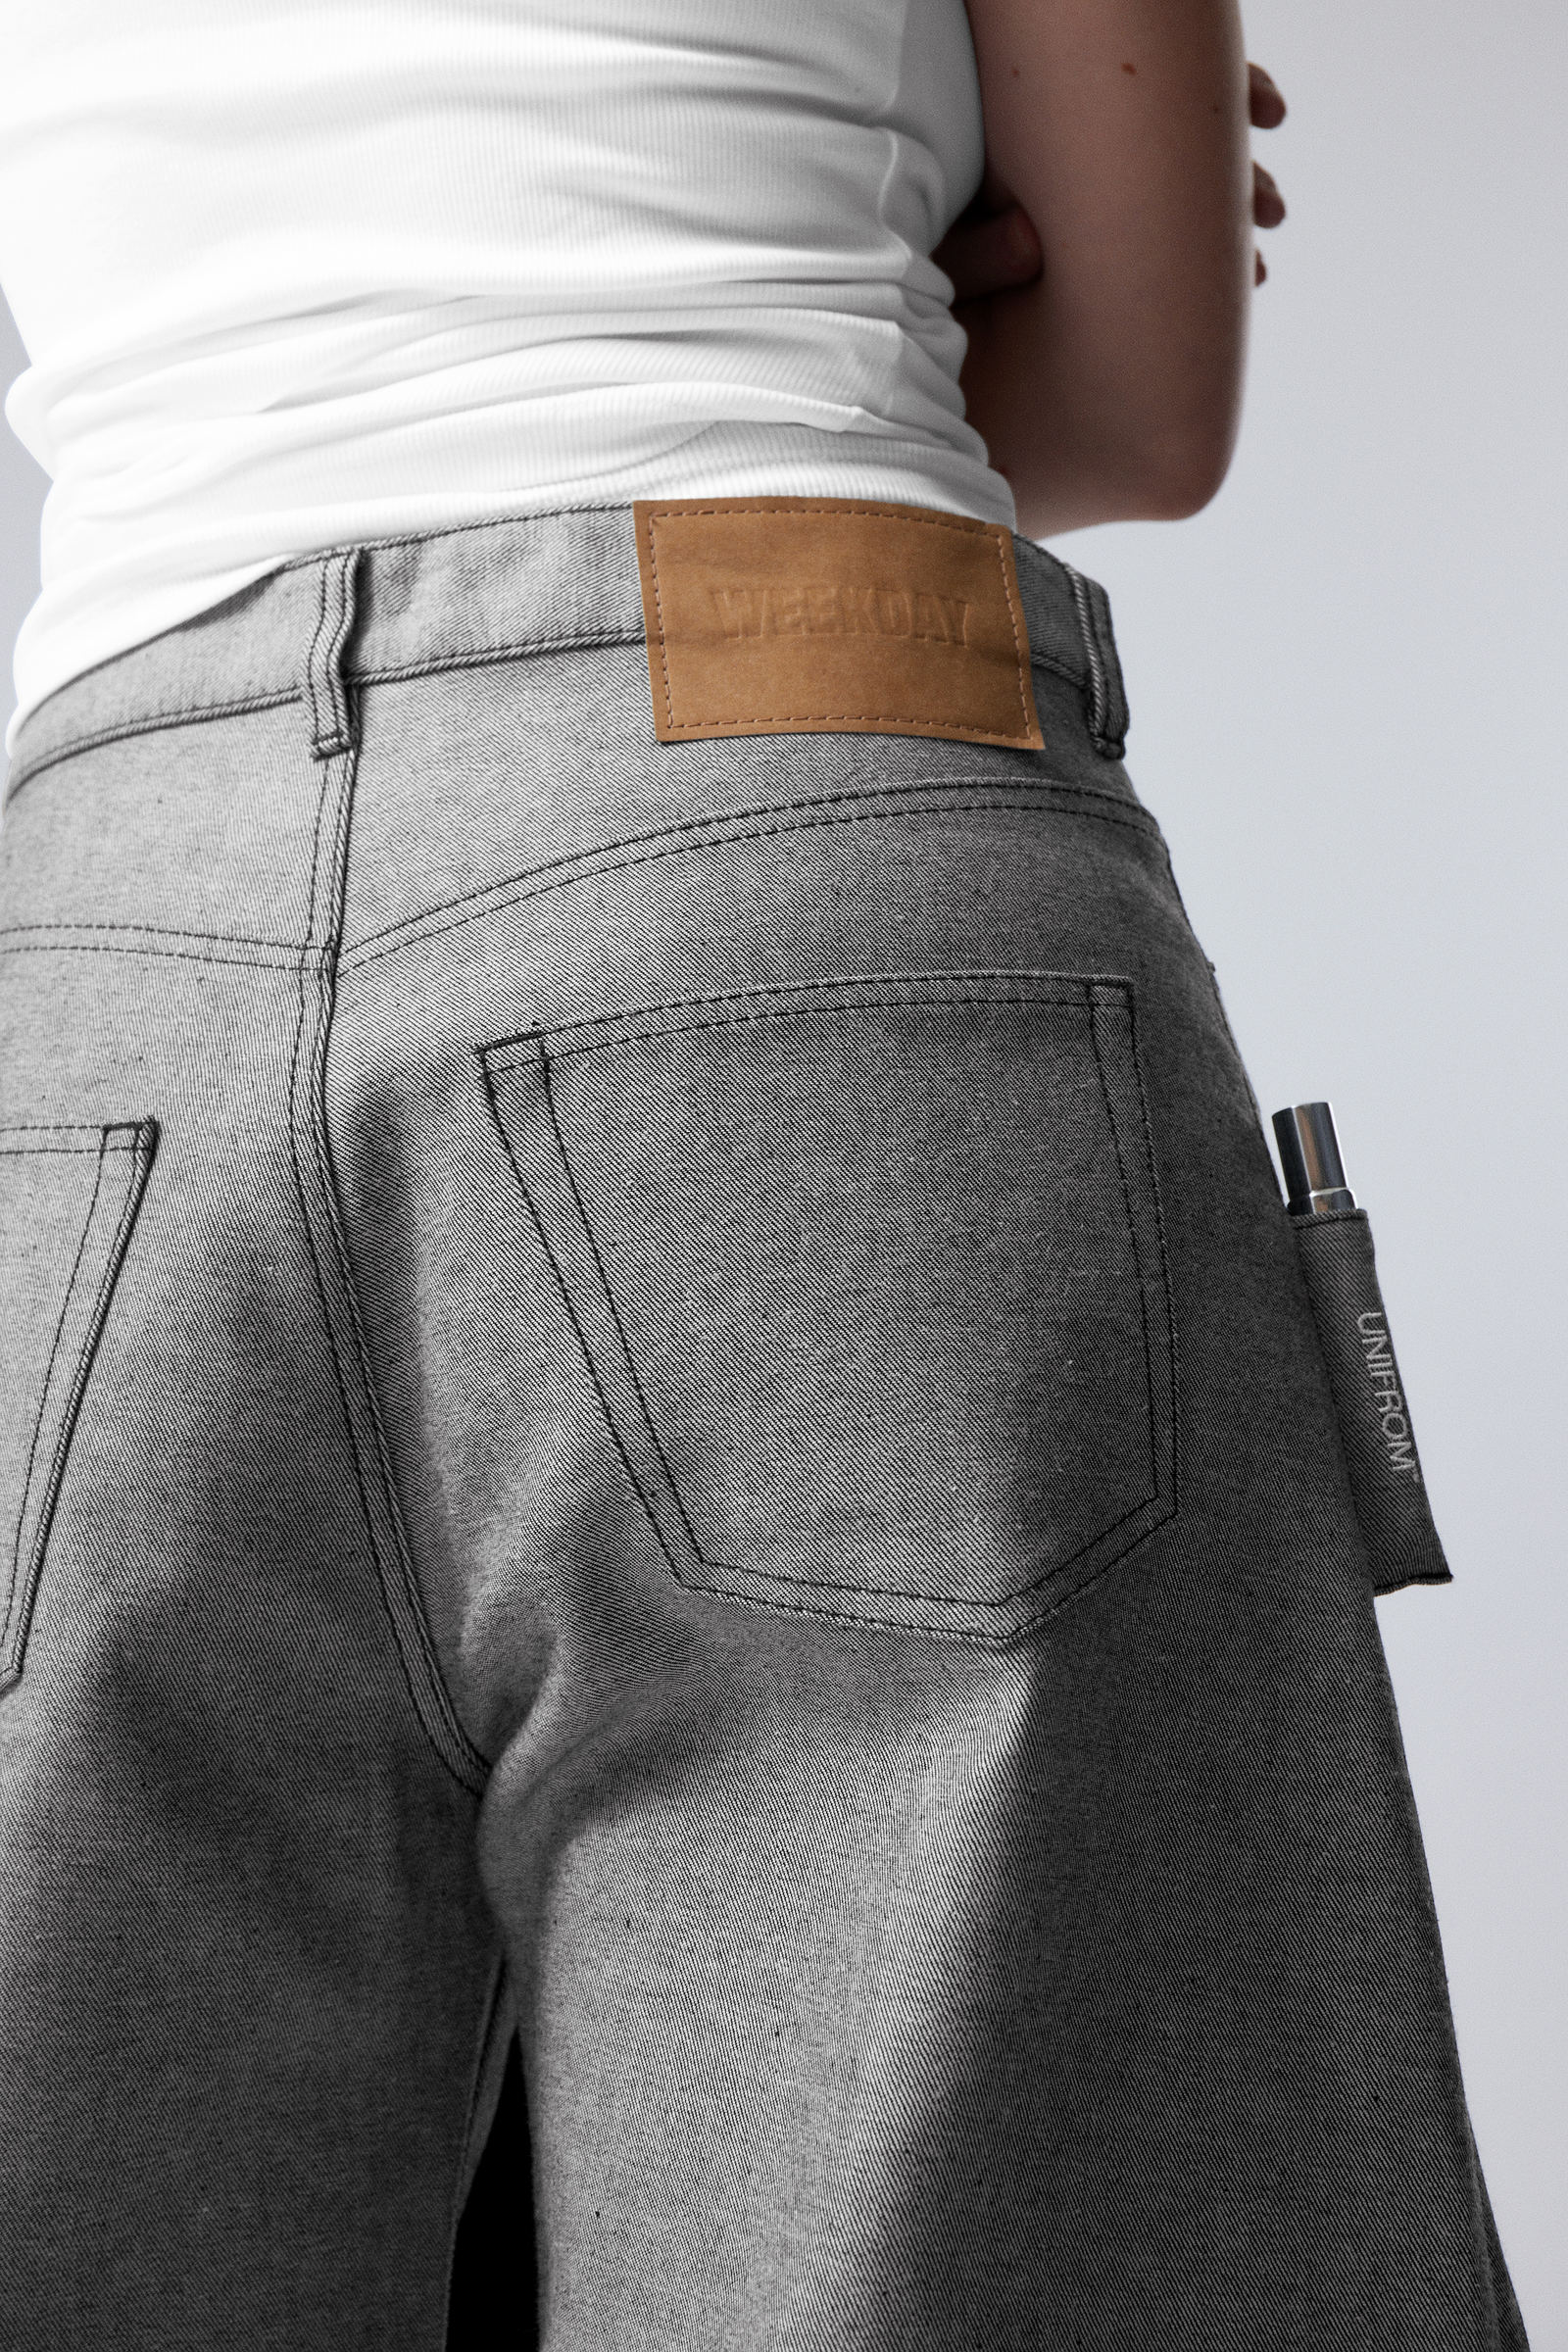 Two-Tone Grey - Unifrom™ + Weekday Limited Edition Folder Jeans - 2